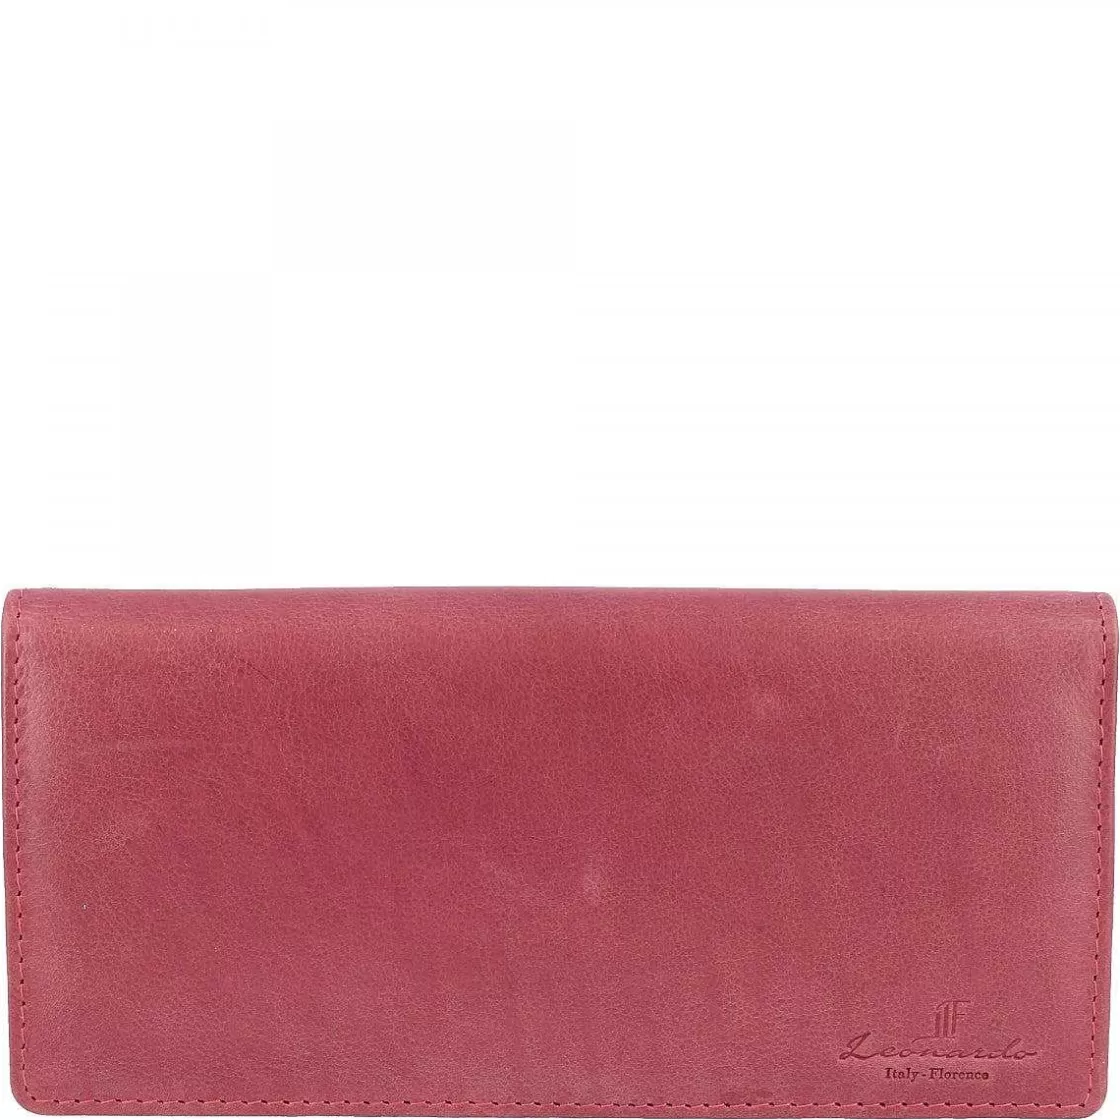 Leonardo Women'S Wallet Made Of Nappa Leather For Banknotes And Credit Cards In Various Colors Store